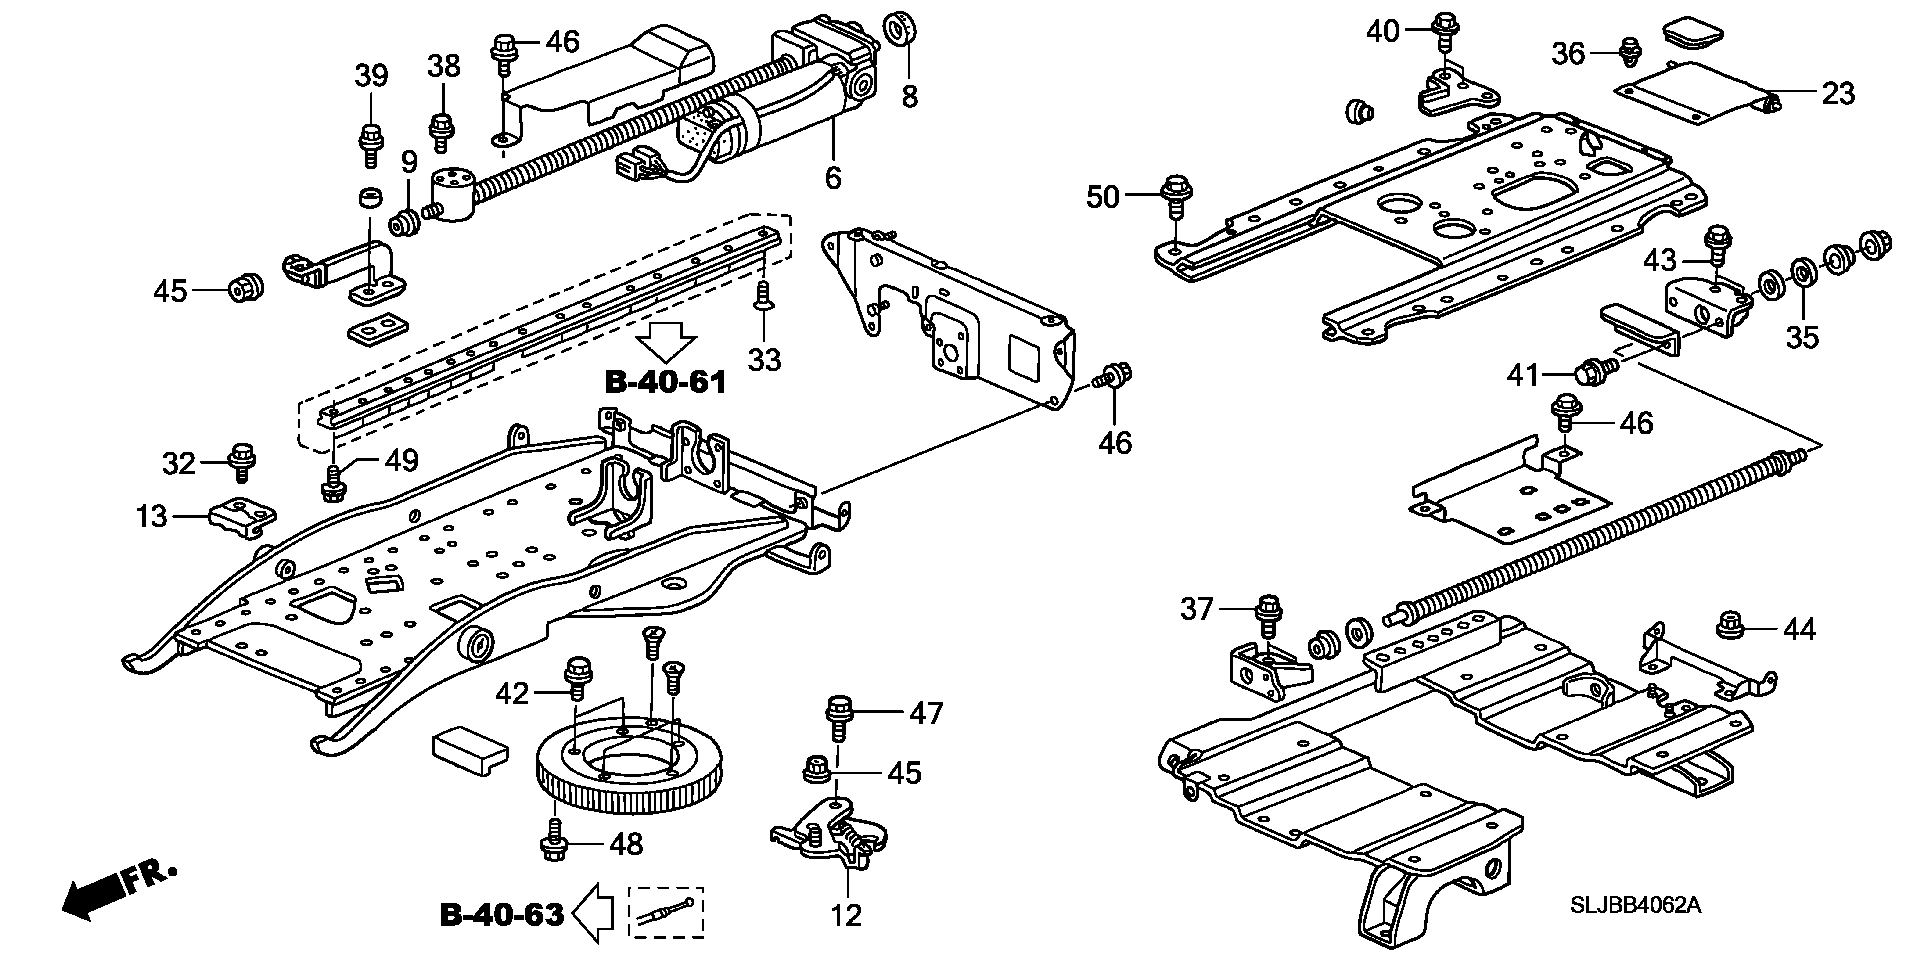 LIFTER  COMPONENT PARTS (2) ( SIDE LIFT UP SEAT)